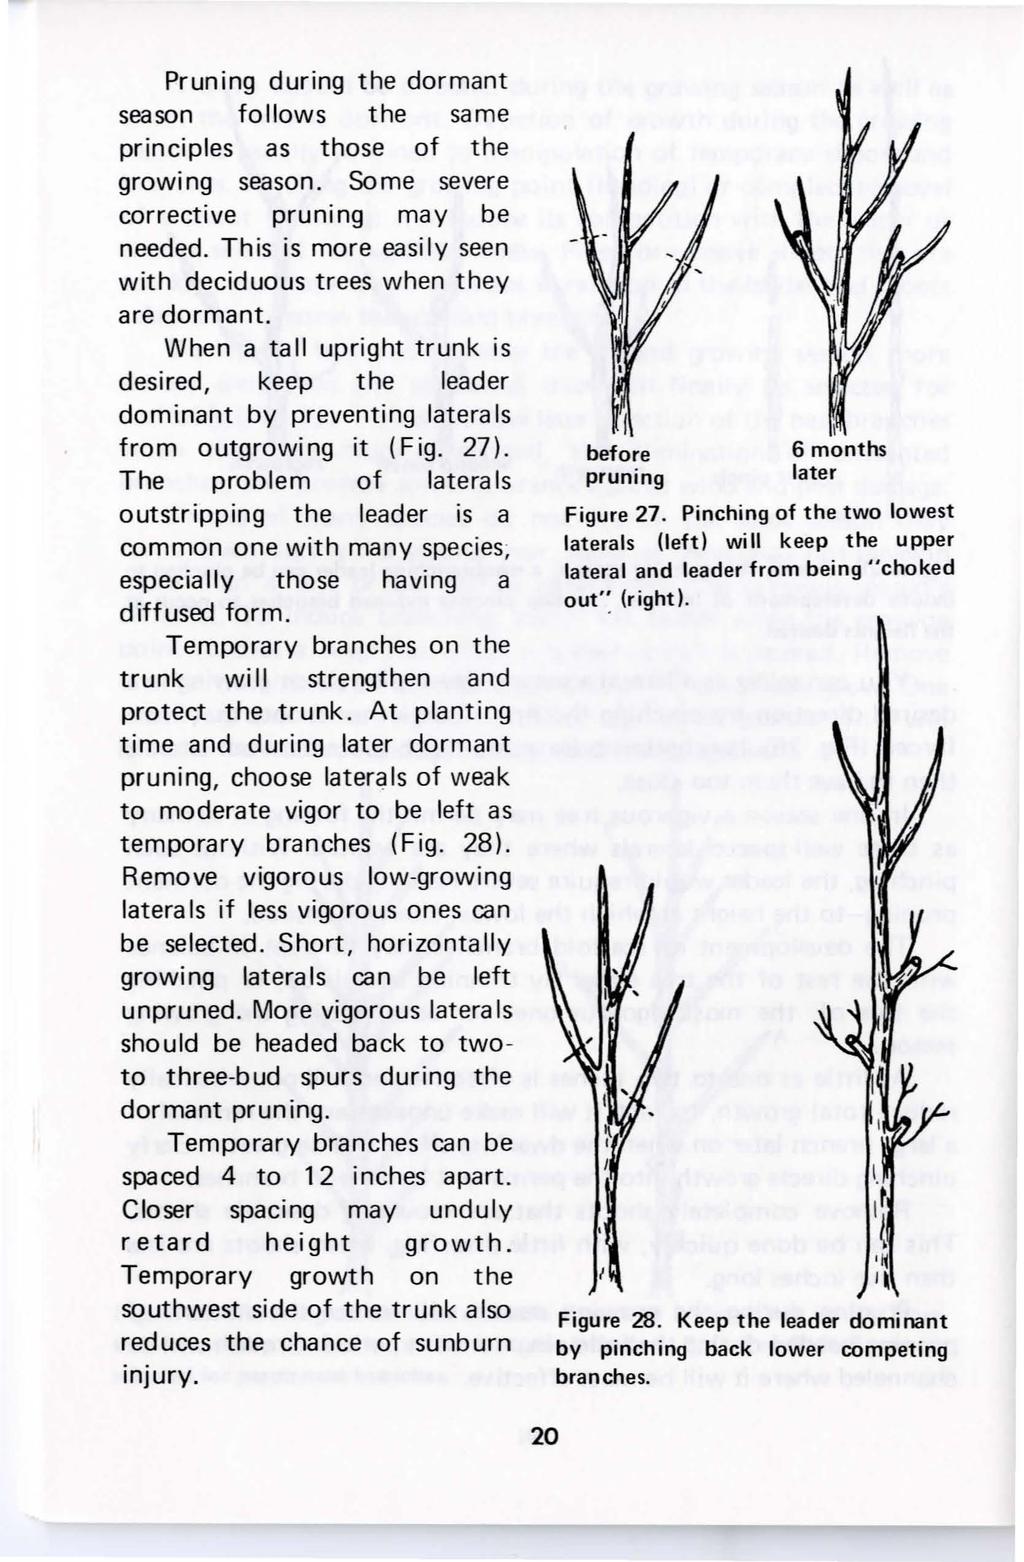 Pruning during the dormant season follows the same principles as those of the growing season. So me severe corrective pruning may be needed.